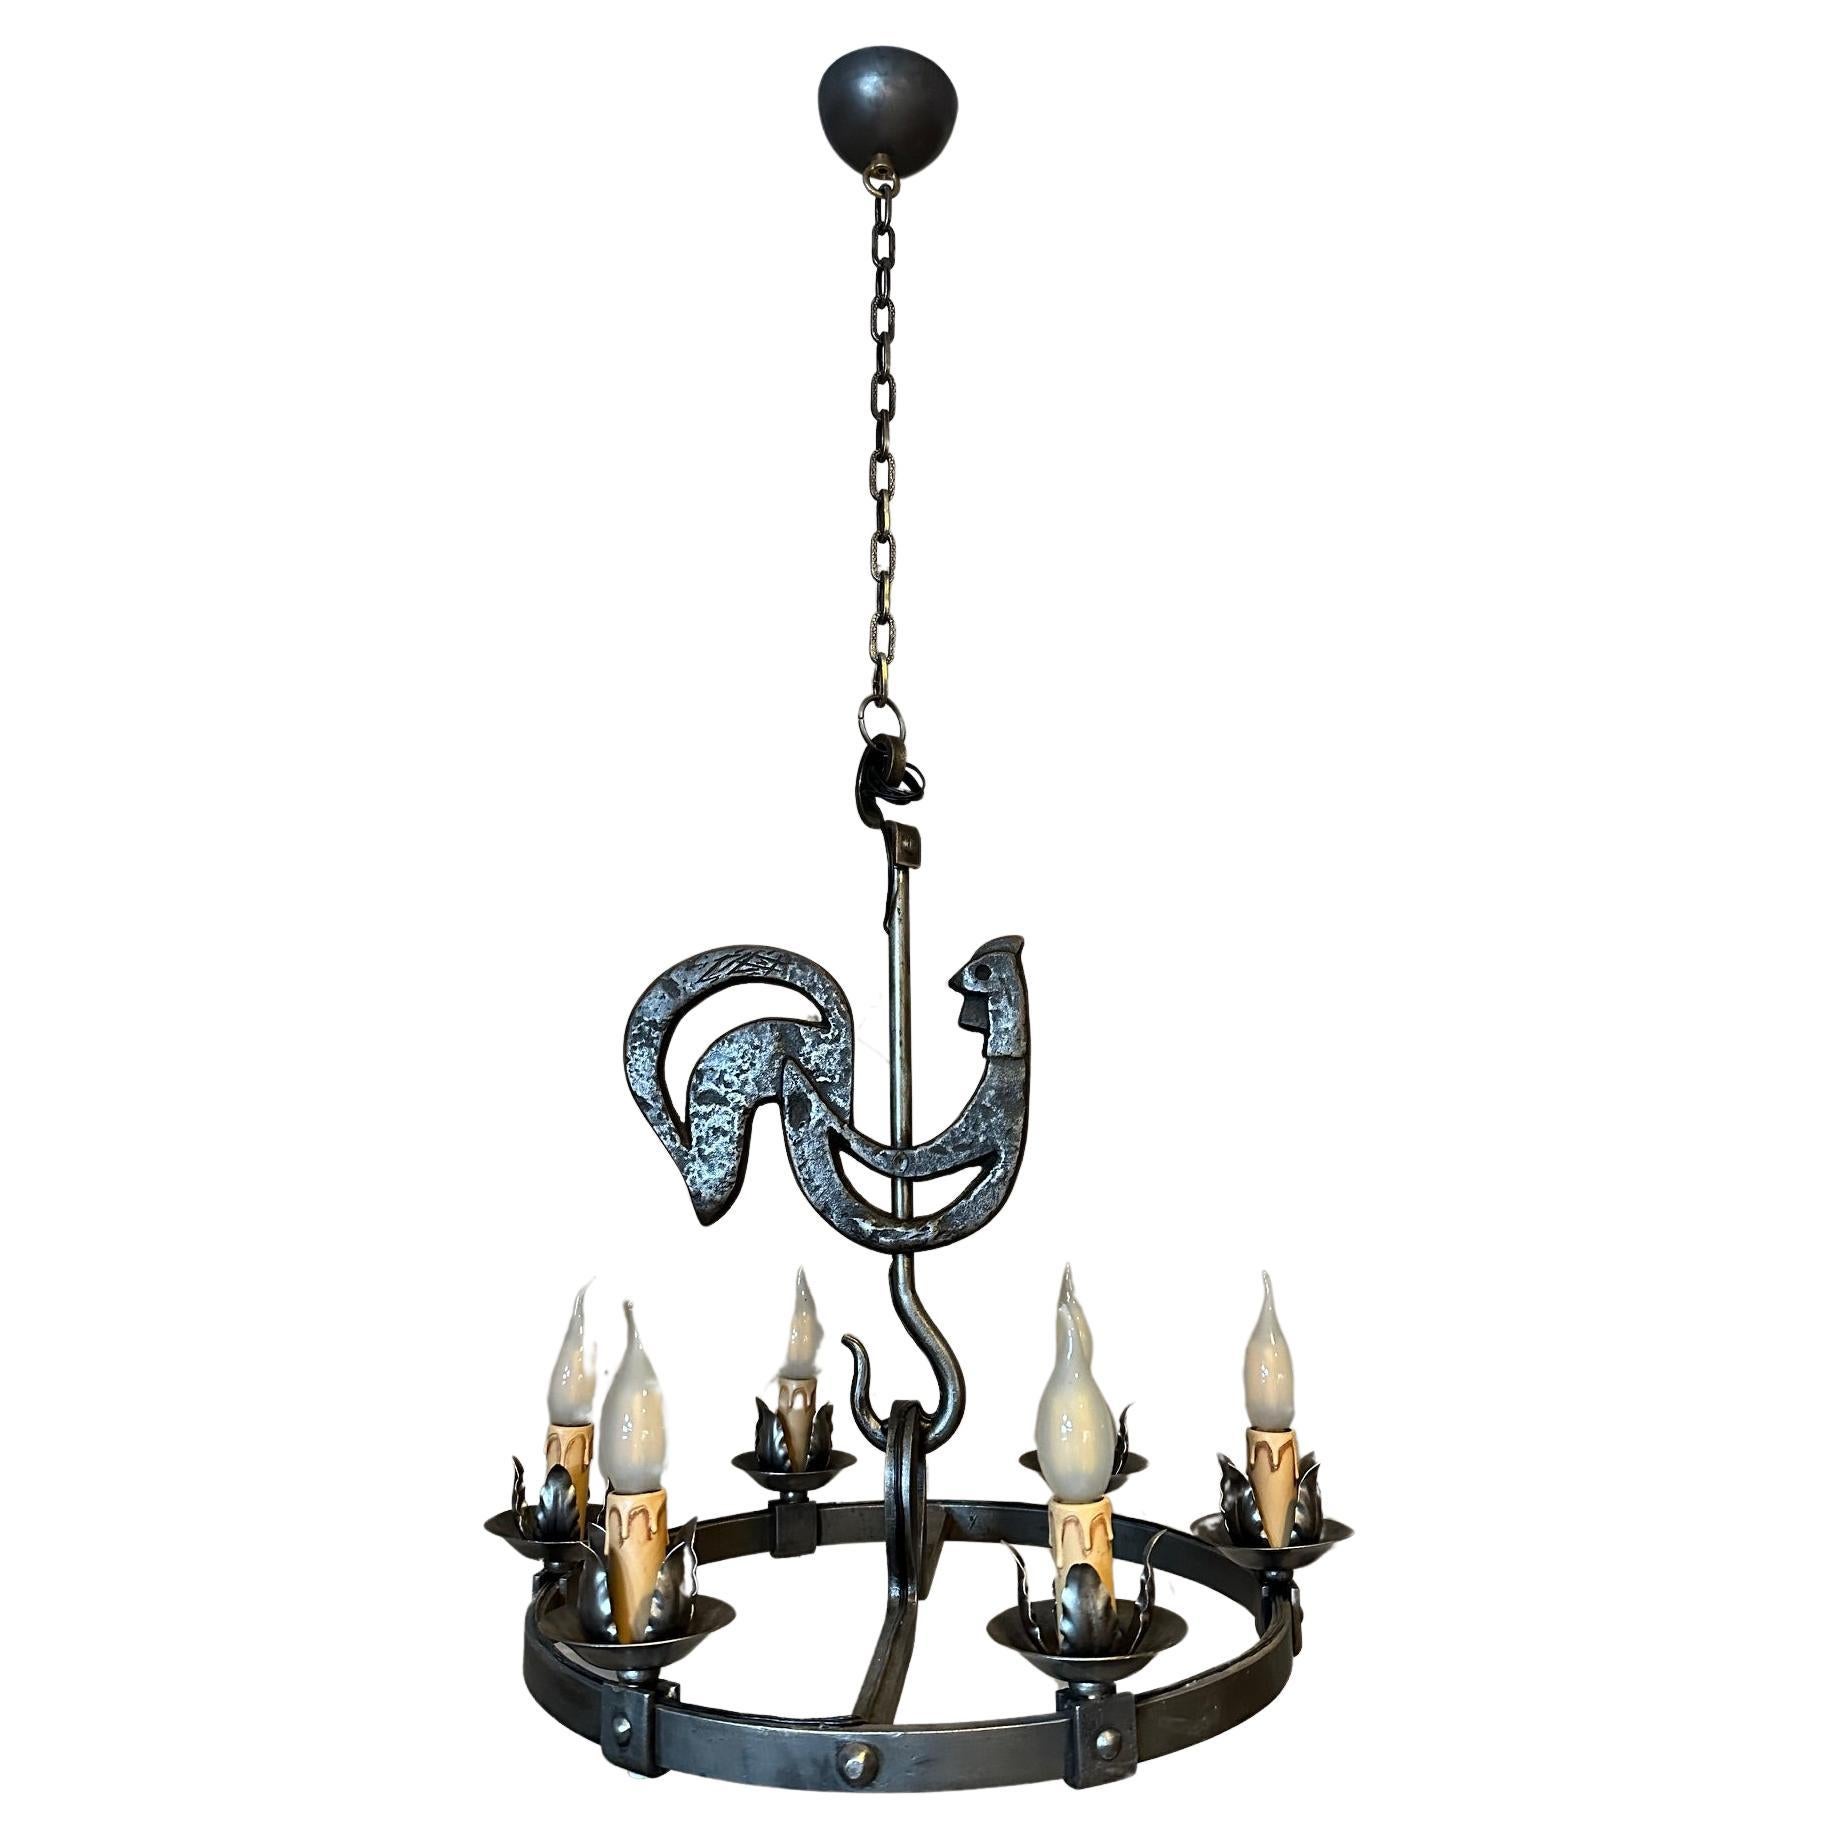 20th century French Jean Touret Wrought Iron Chandelier, 1950s For Sale